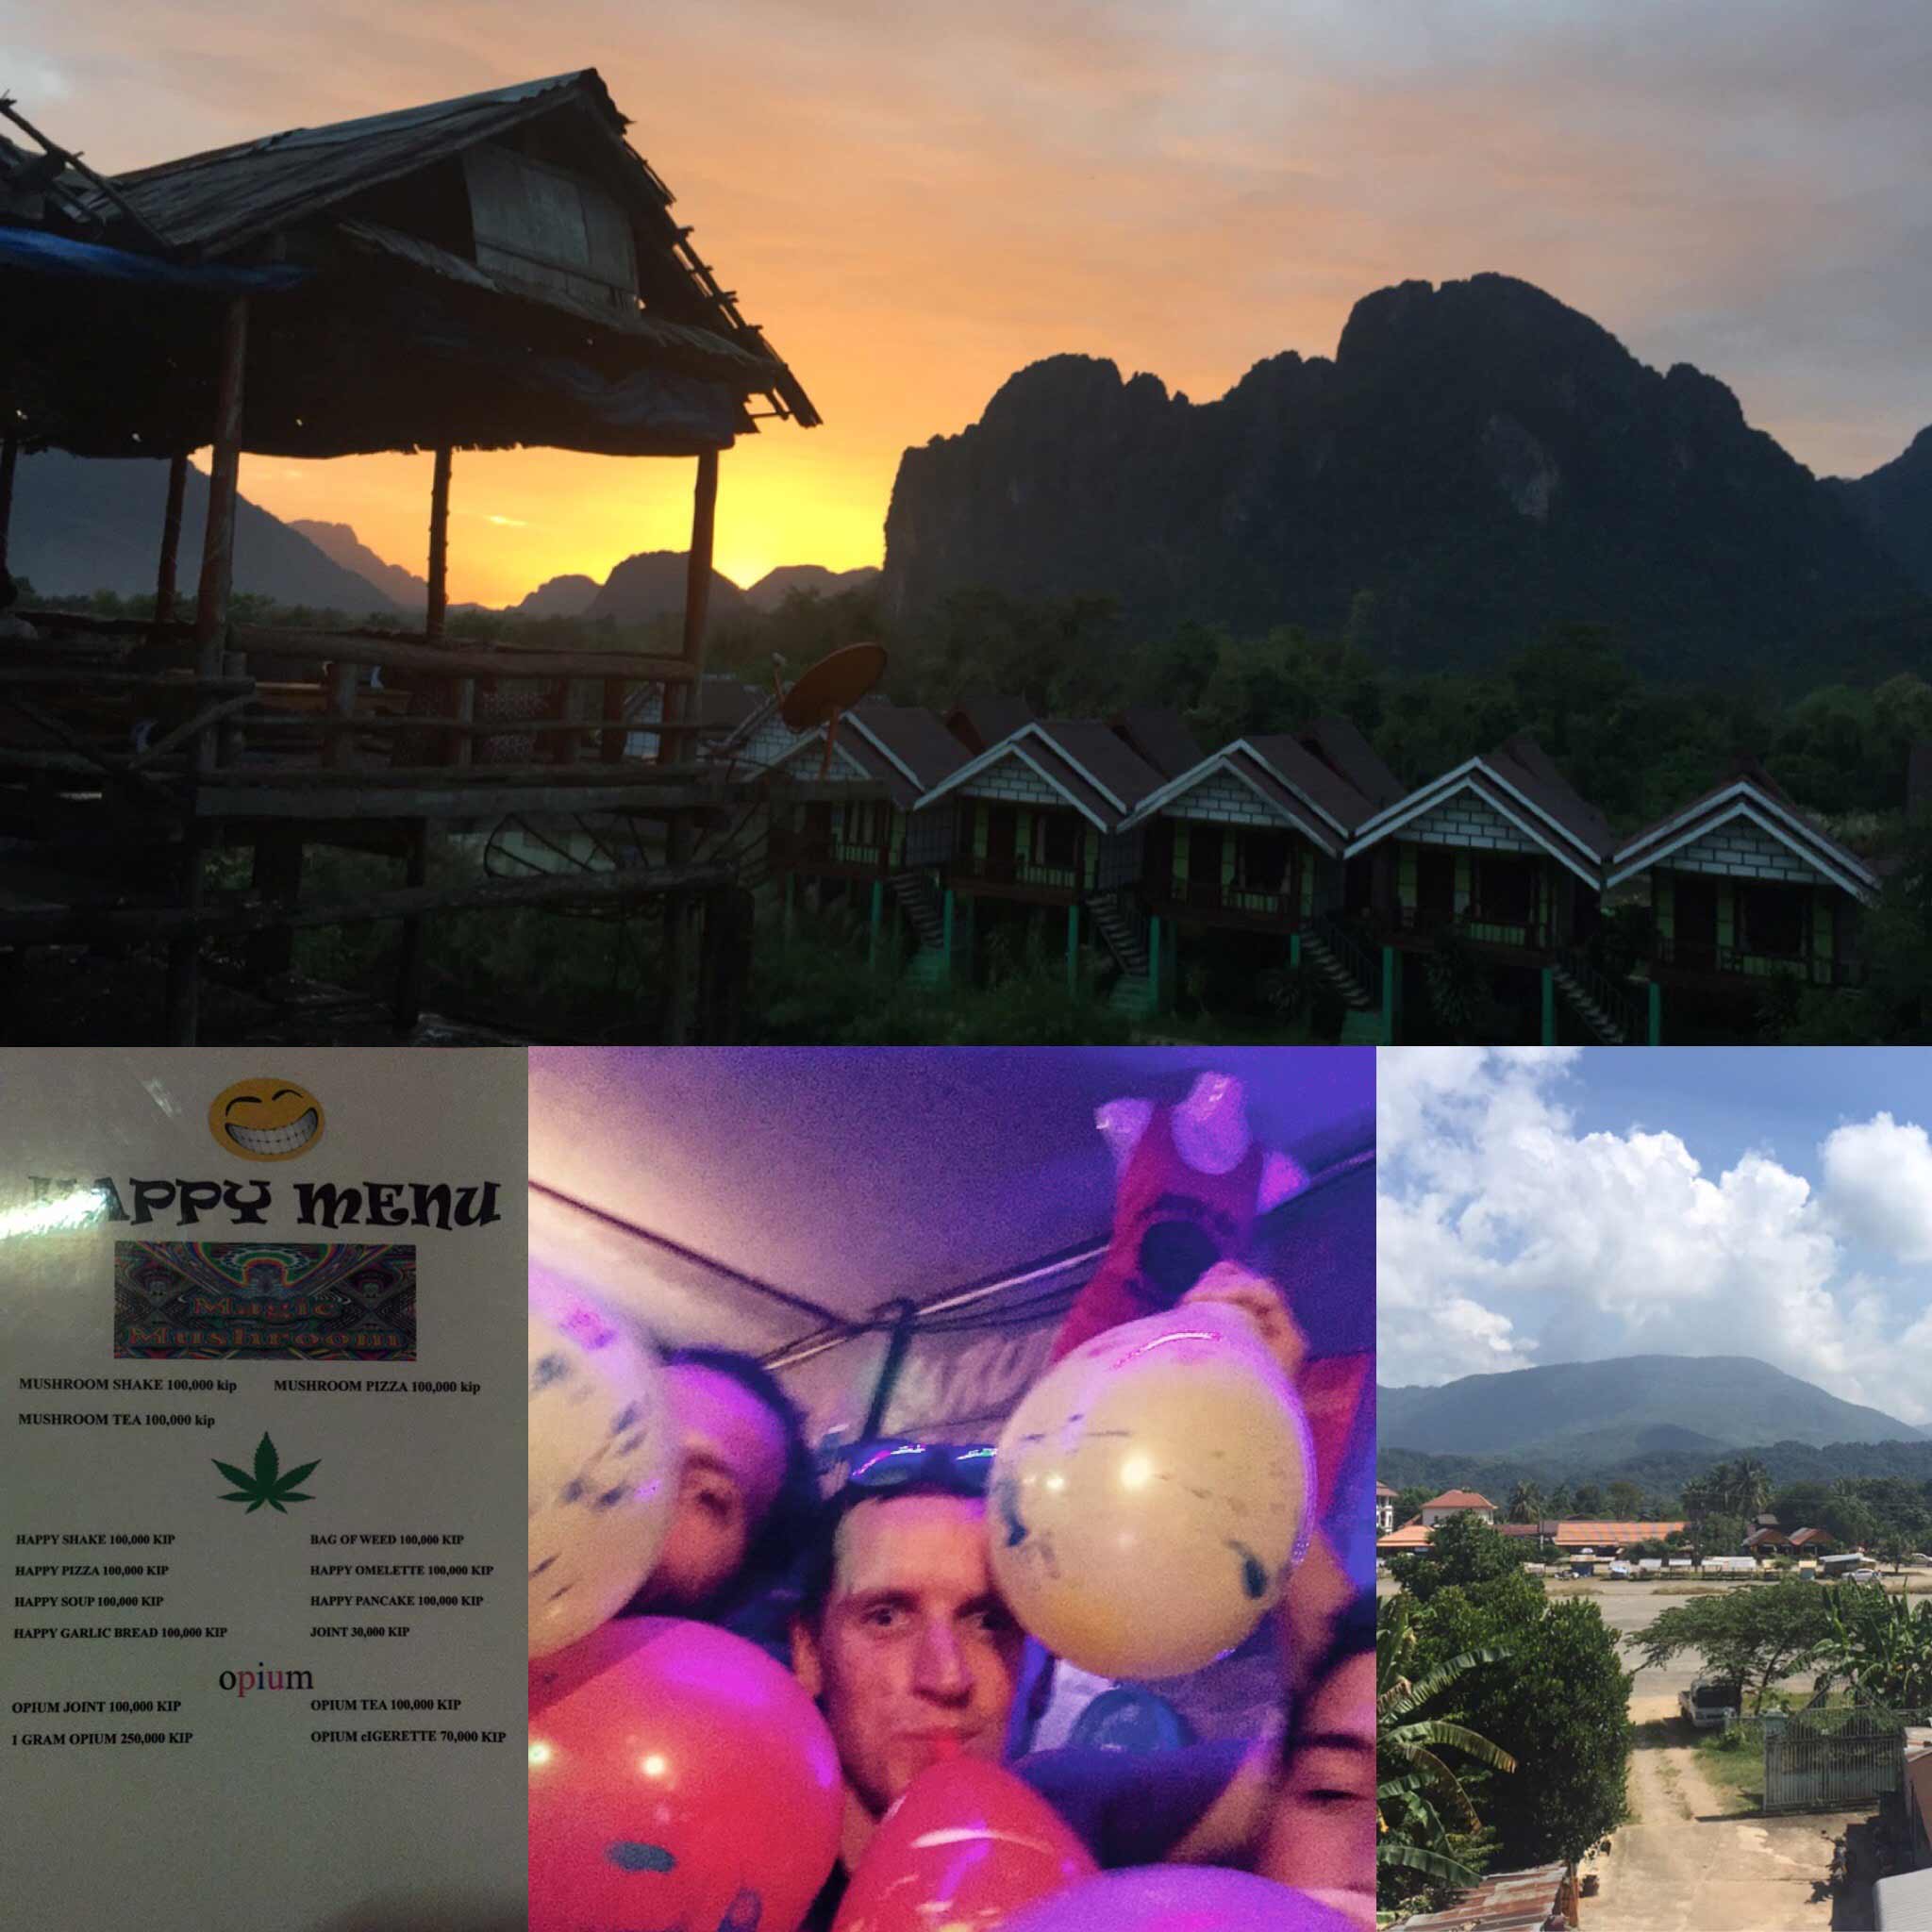 Vang Vieng sunsets and menus in Laos. The day after tubing in Vang Vieng